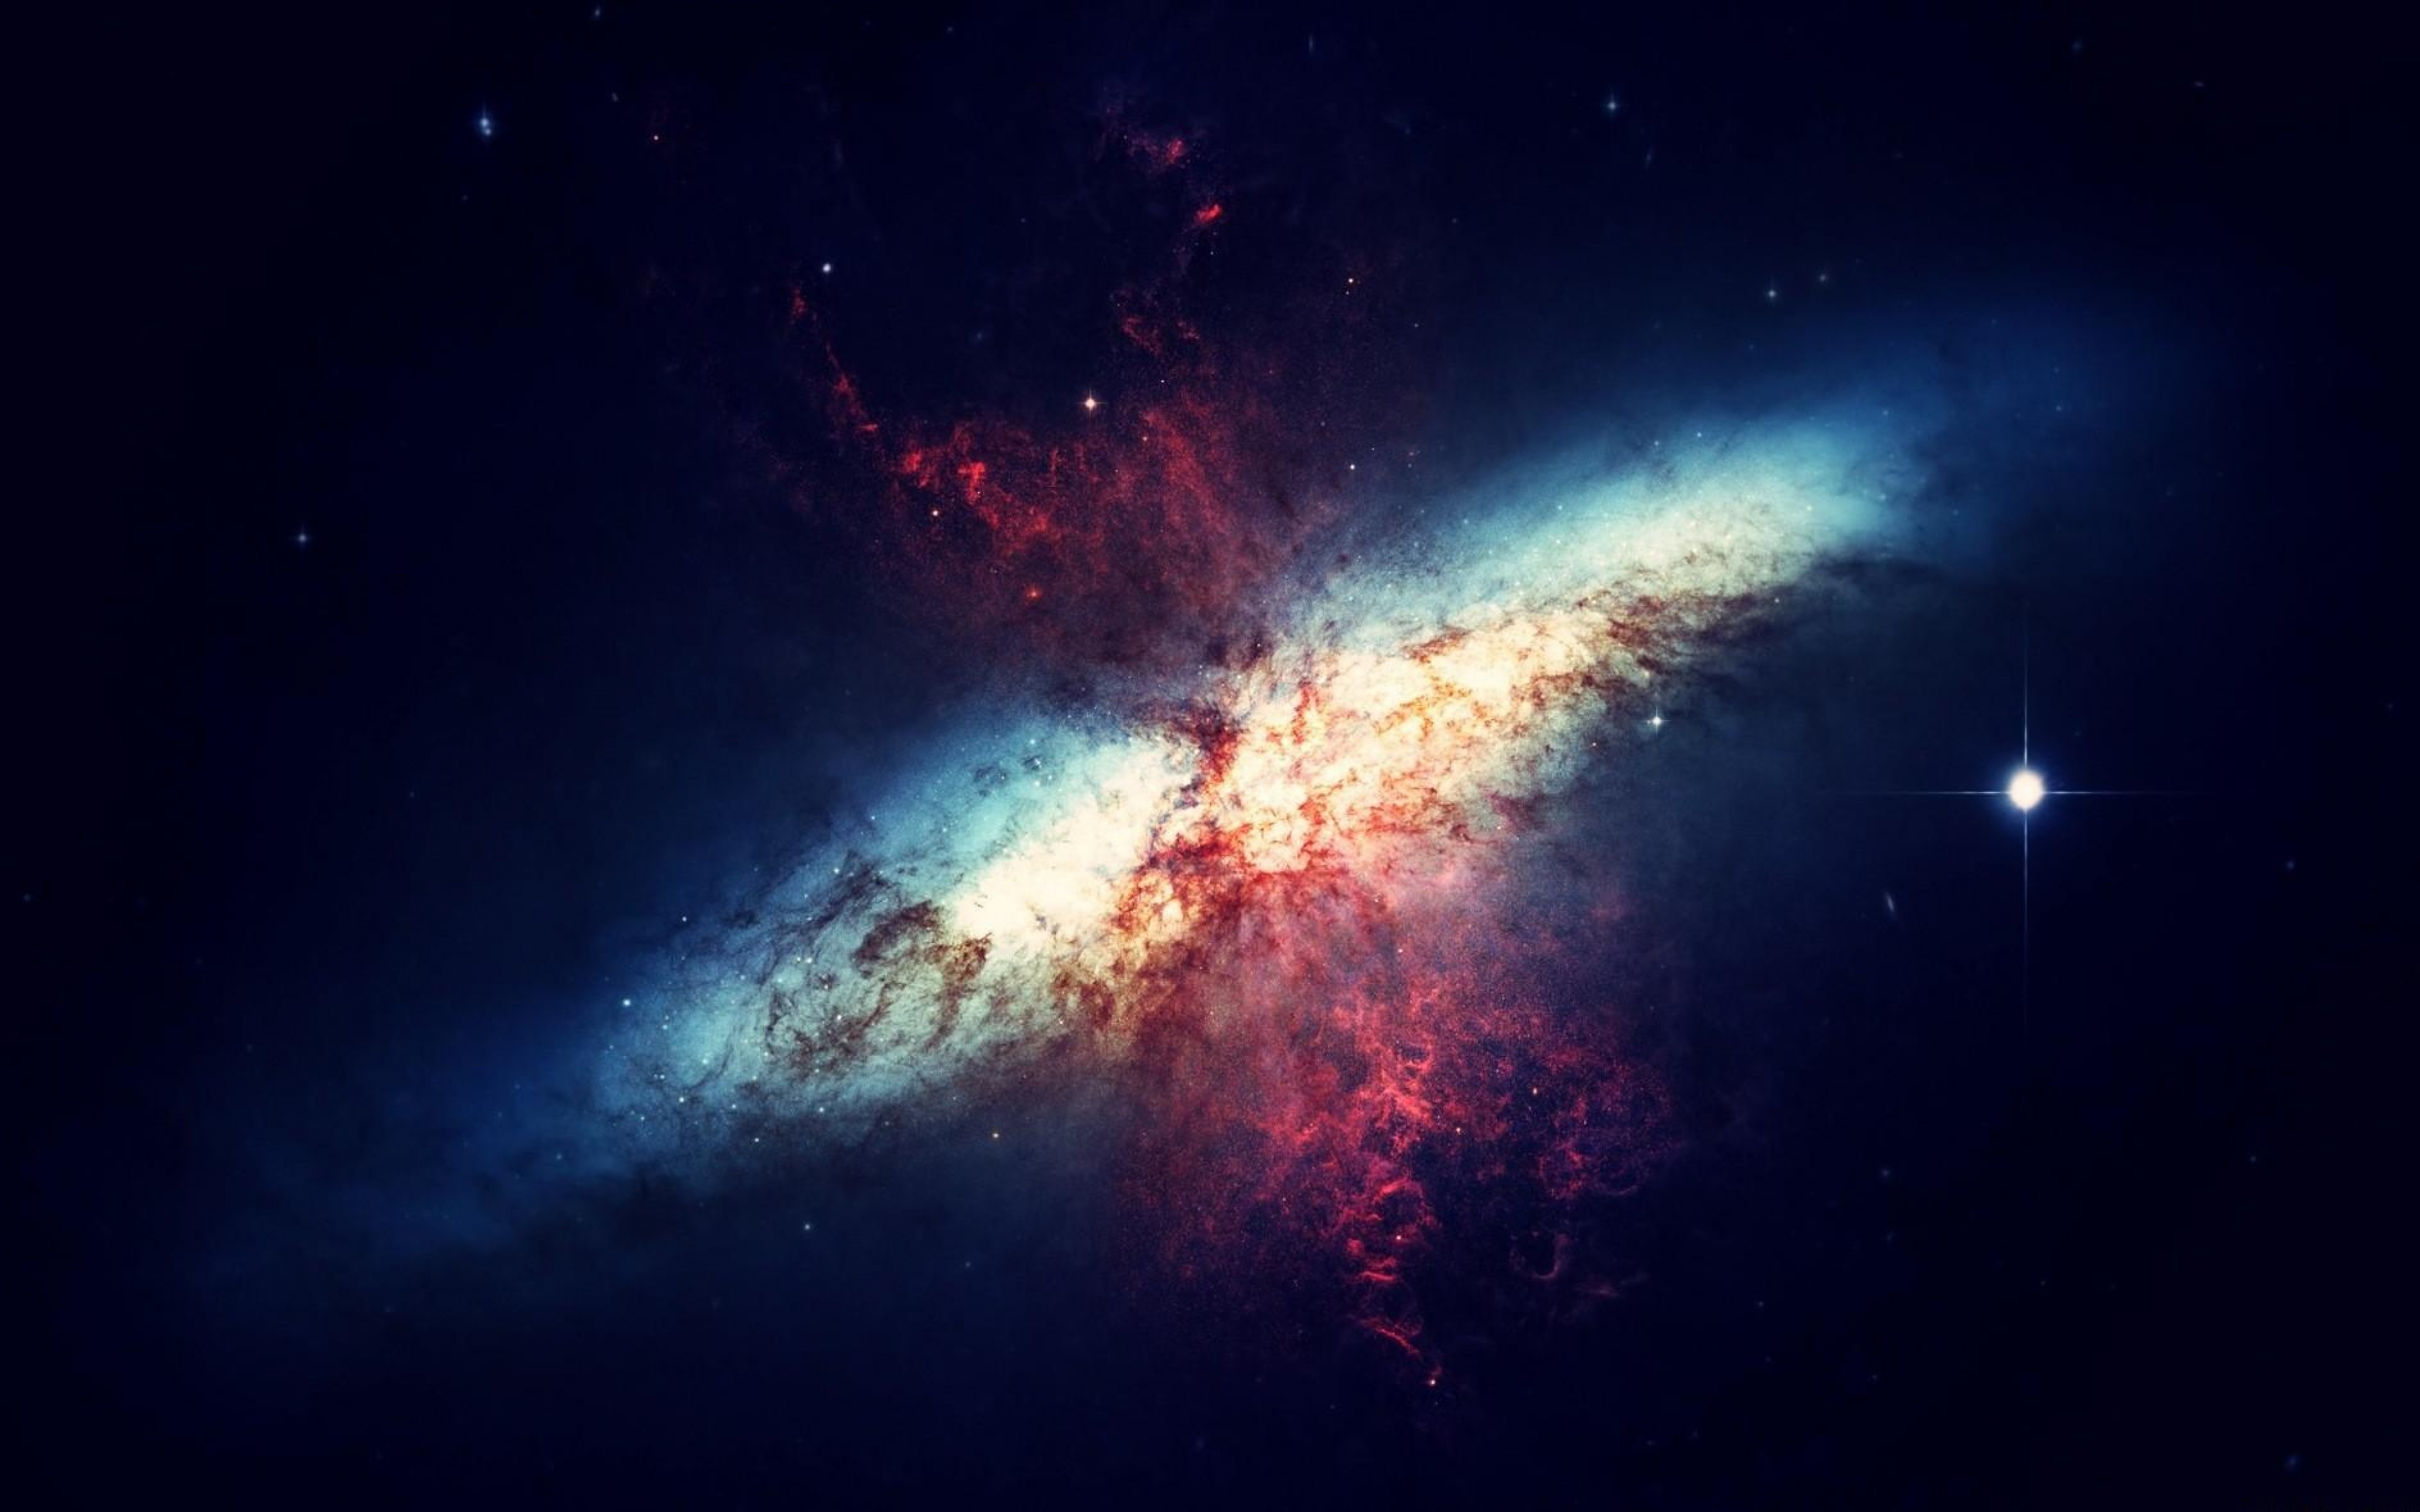 4k Space Awesome Image High Definition Cool Colourful Background